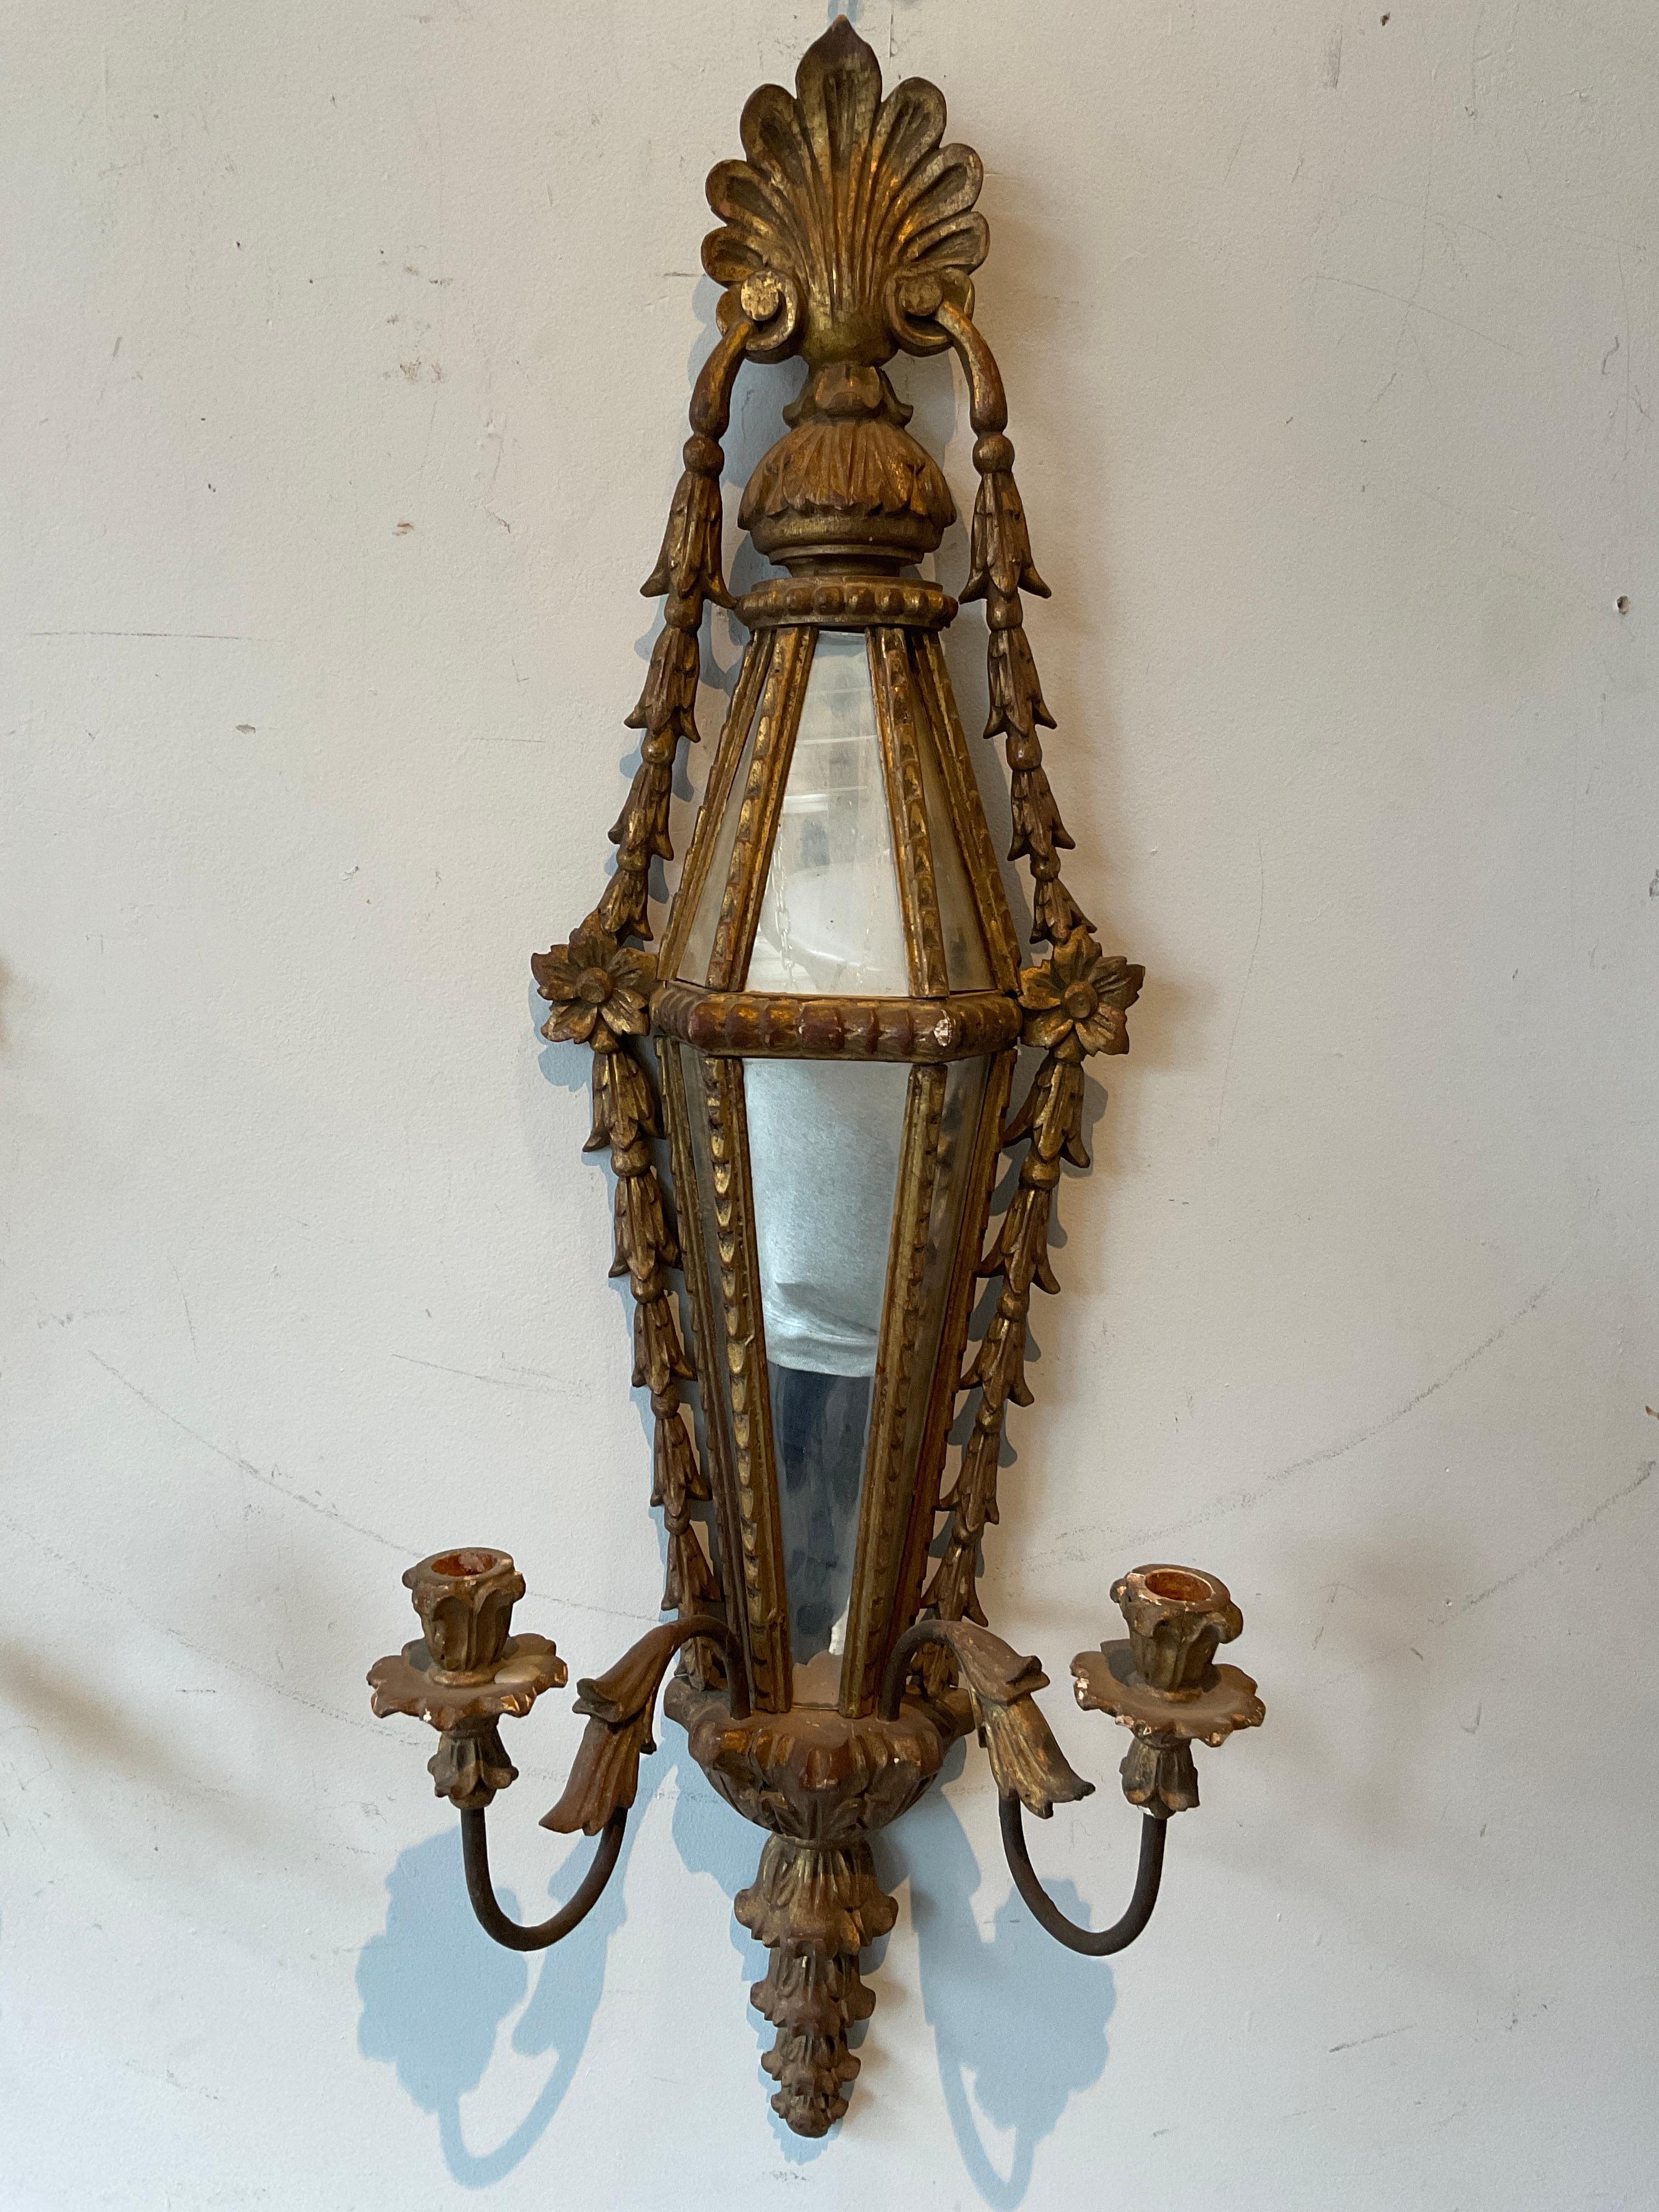 Pair of 1960s hand carved wood and mirror Italian sconces.
There is no electrical wire.